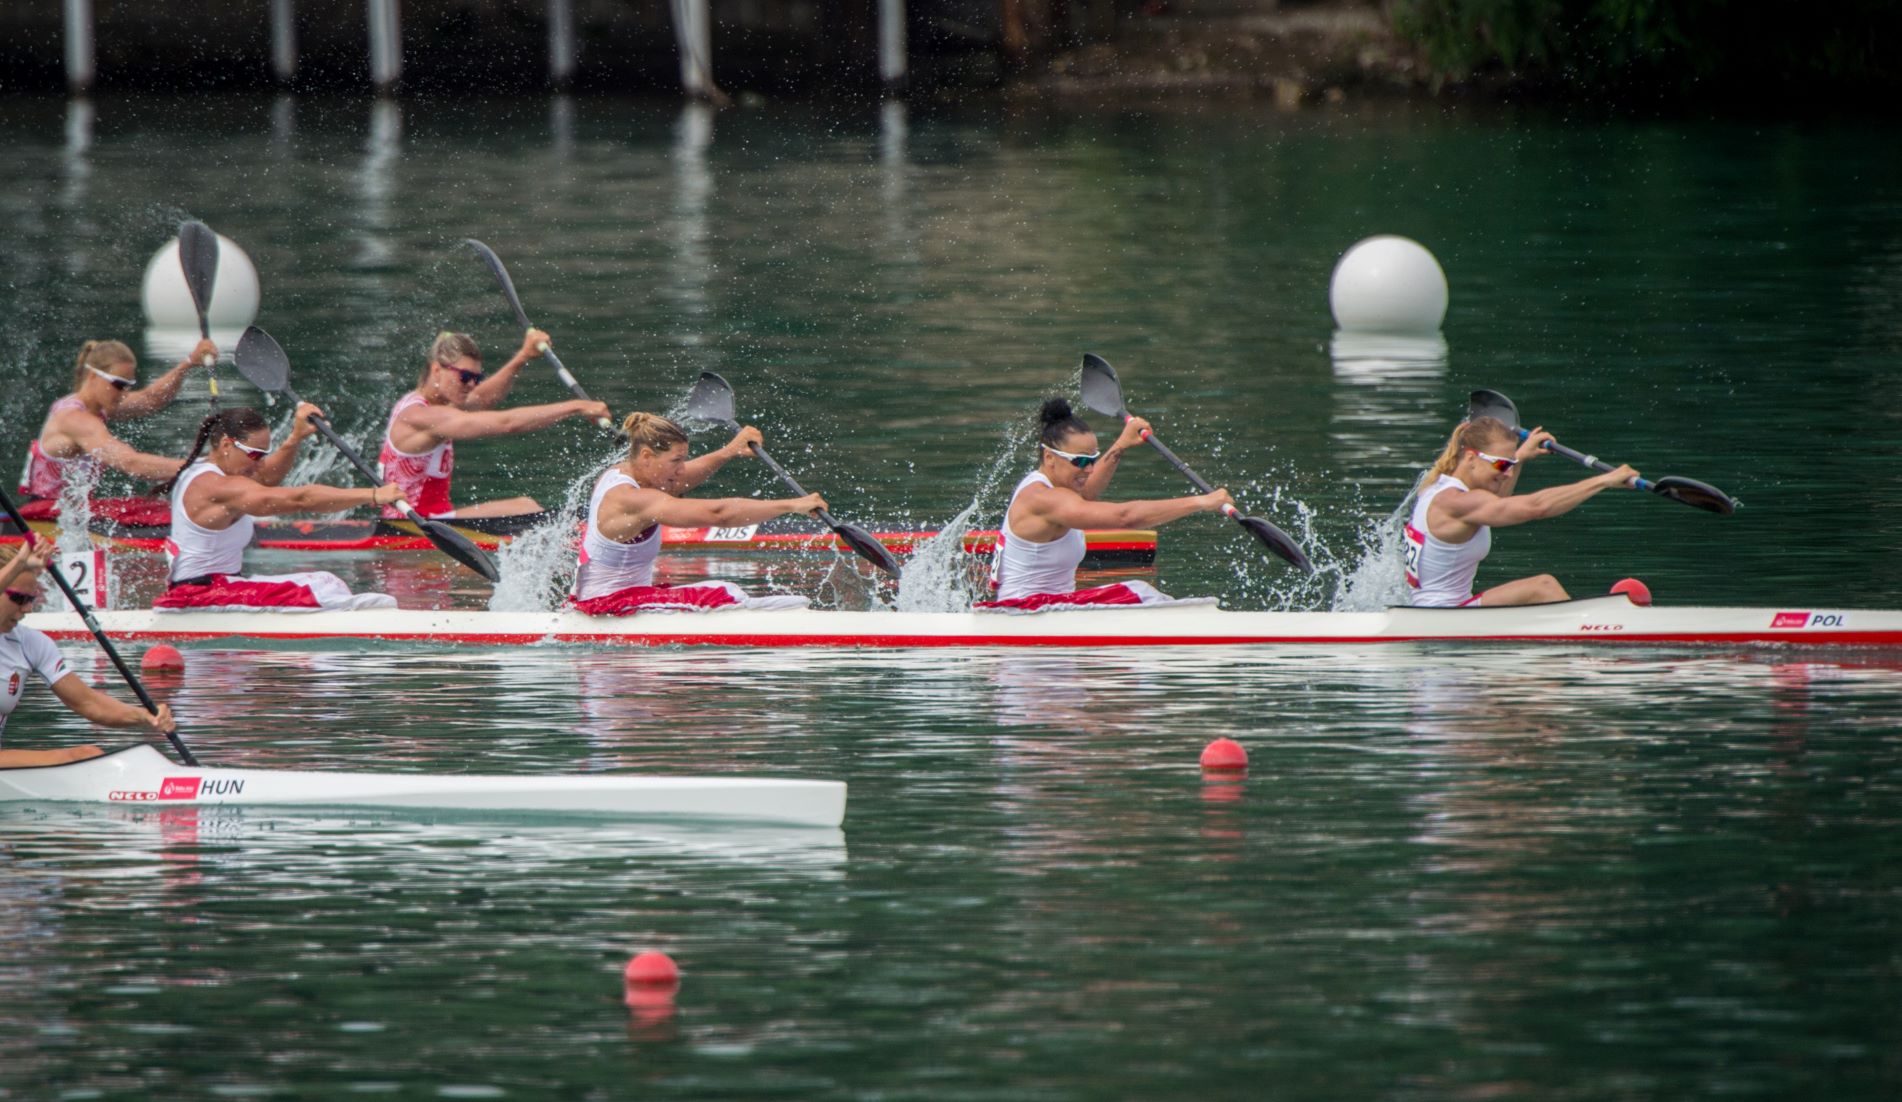 Canoeist look forward to the European Games. “We will treat it with prestige”